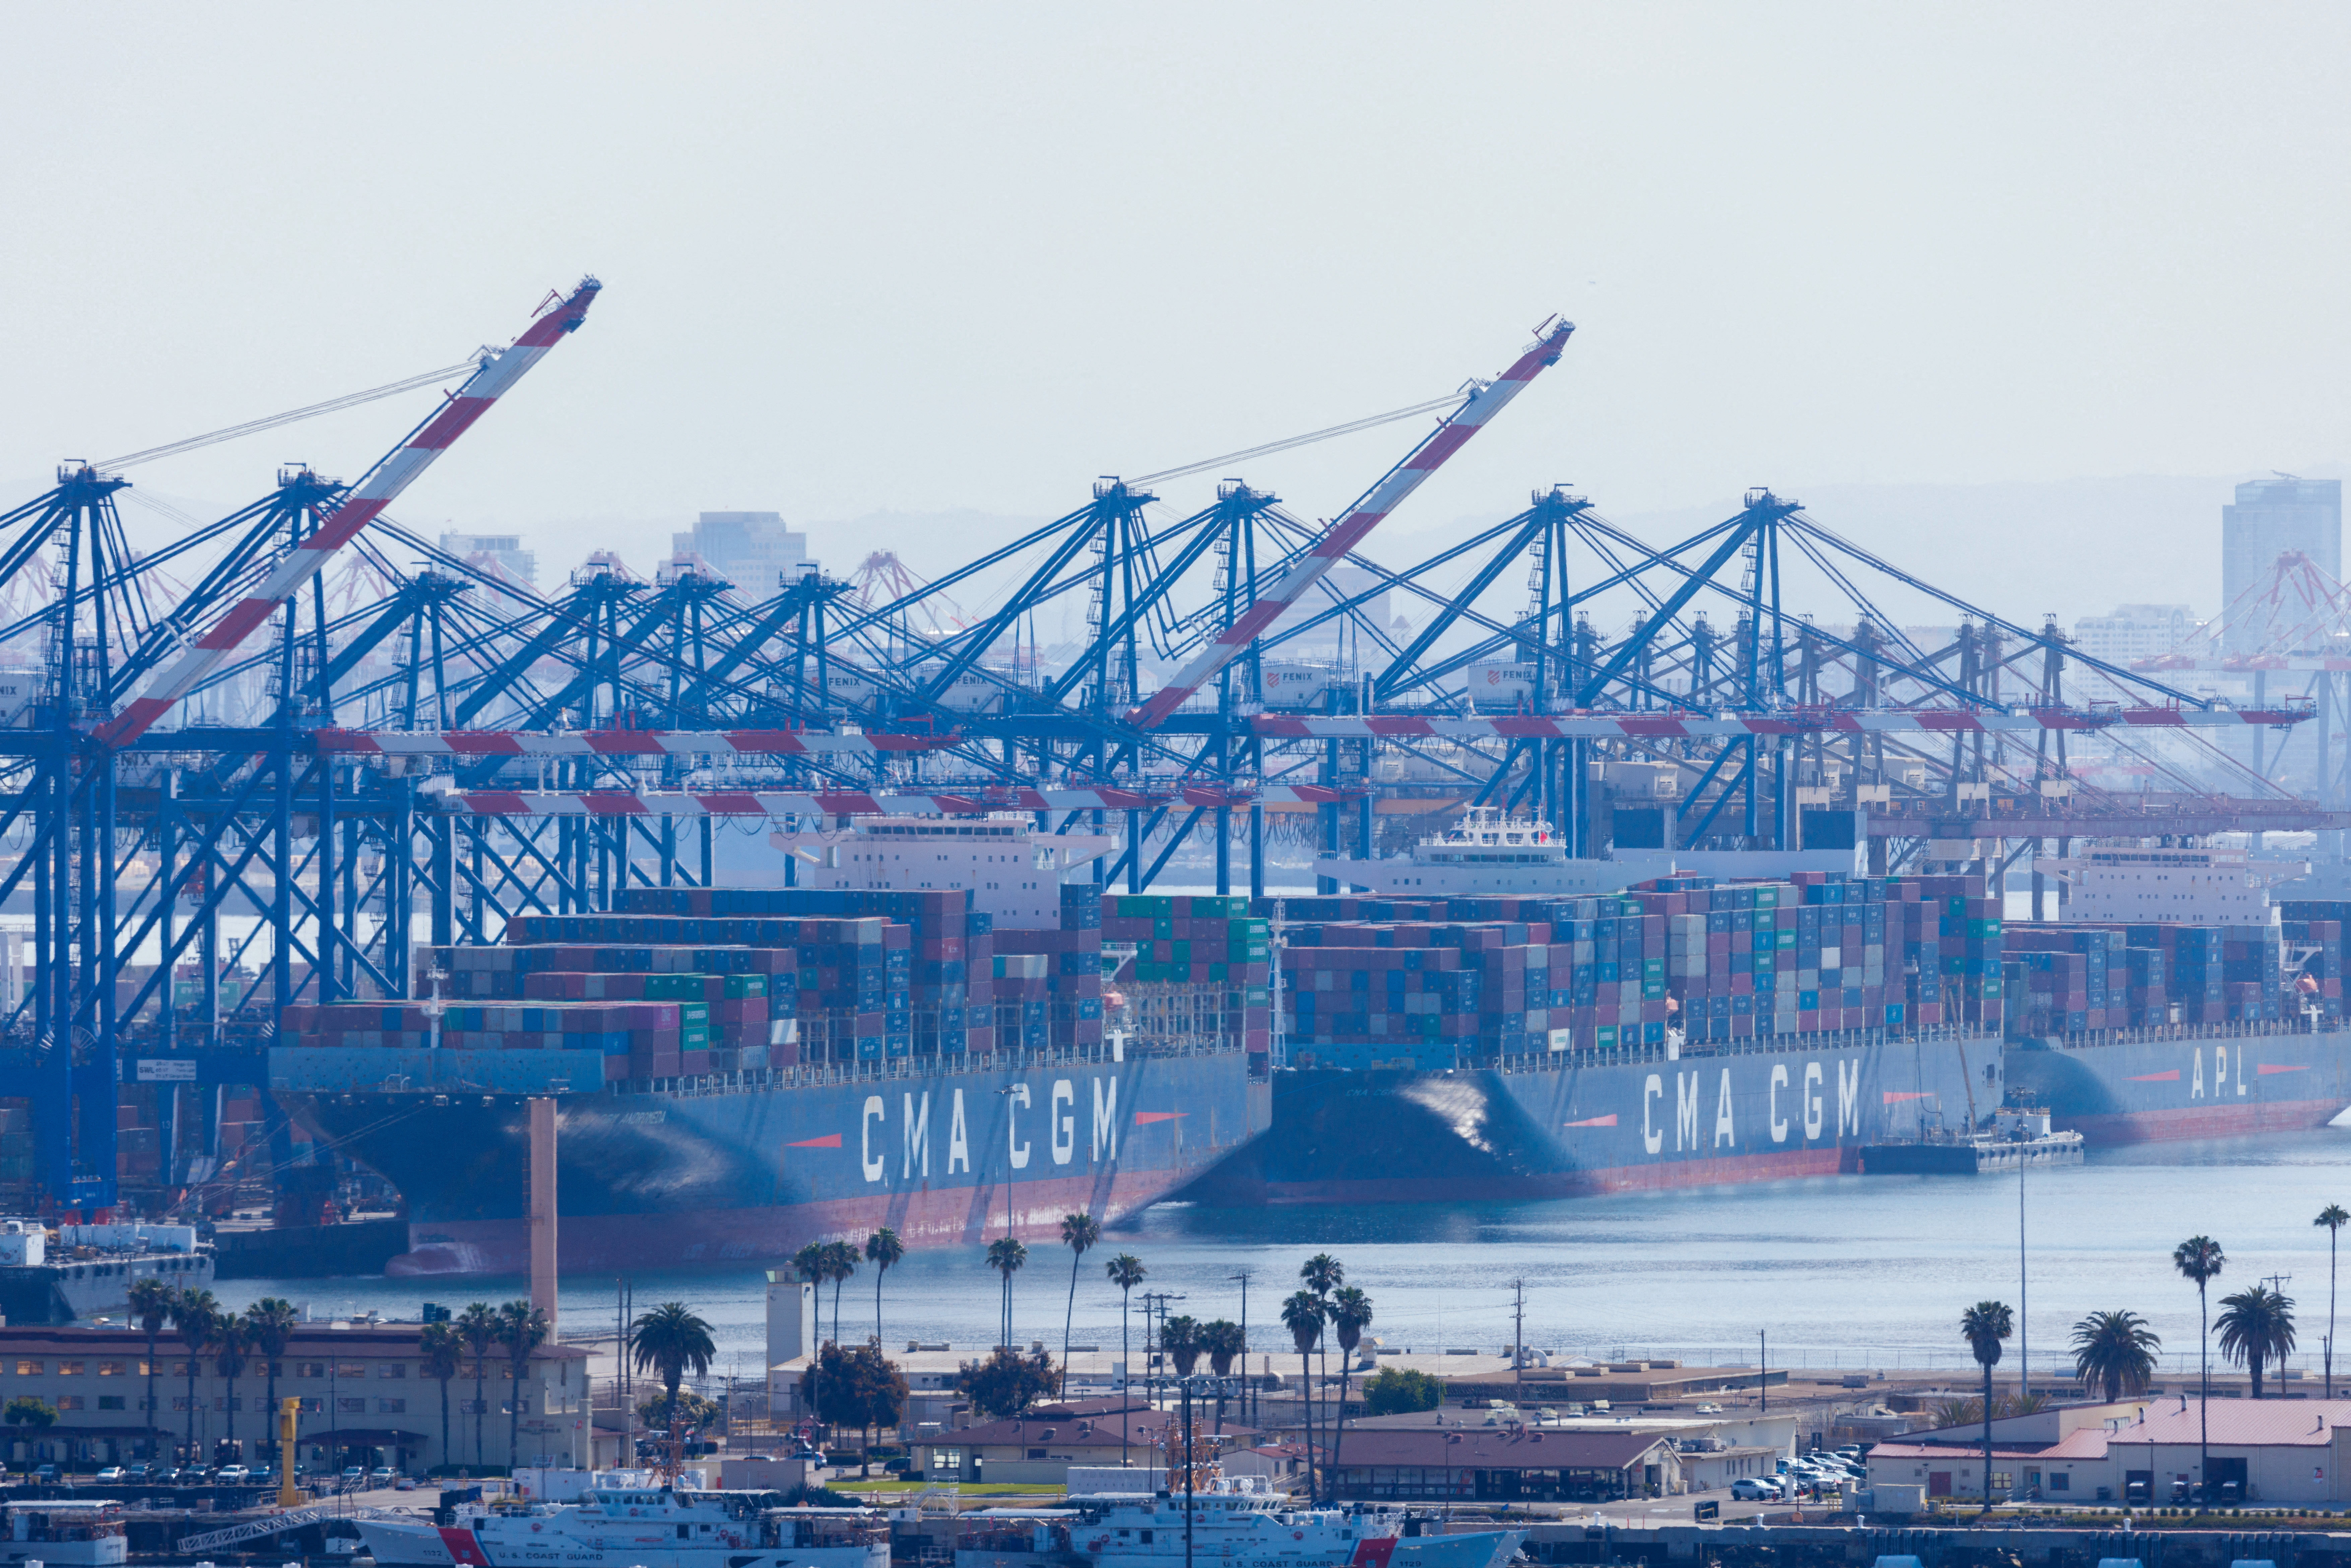 Containships are shown at the Port of Los Angeles